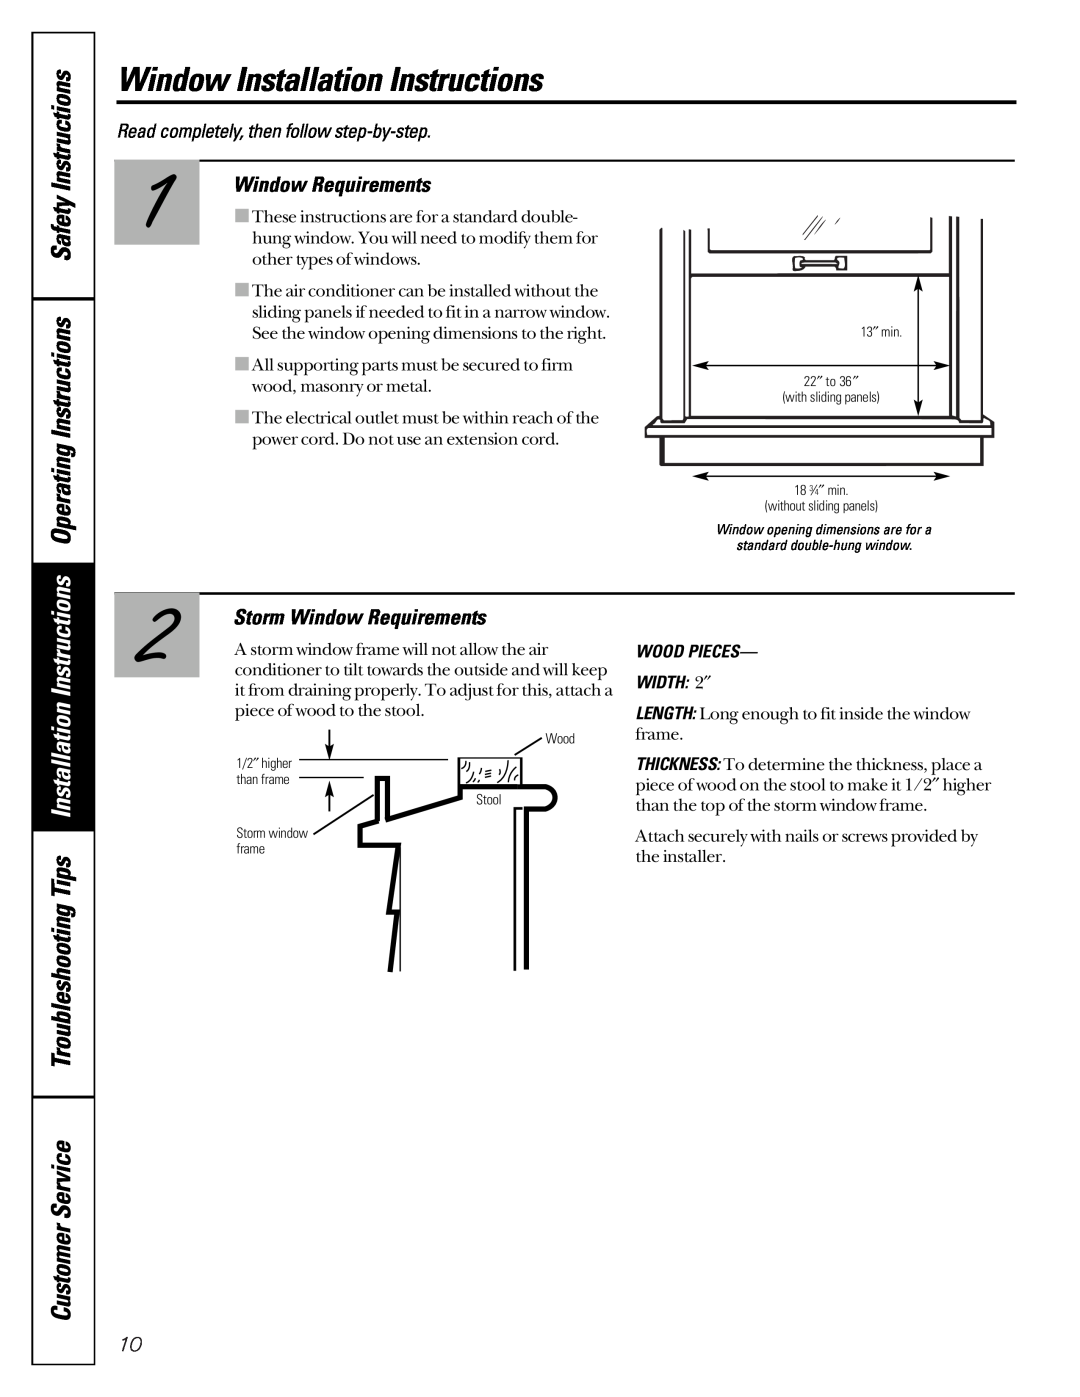 Genie AG_05, AG_06 Storm Window Requirements, Window Installation Instructions, CustomerService, WOOD PIECES- WIDTH 2″ 